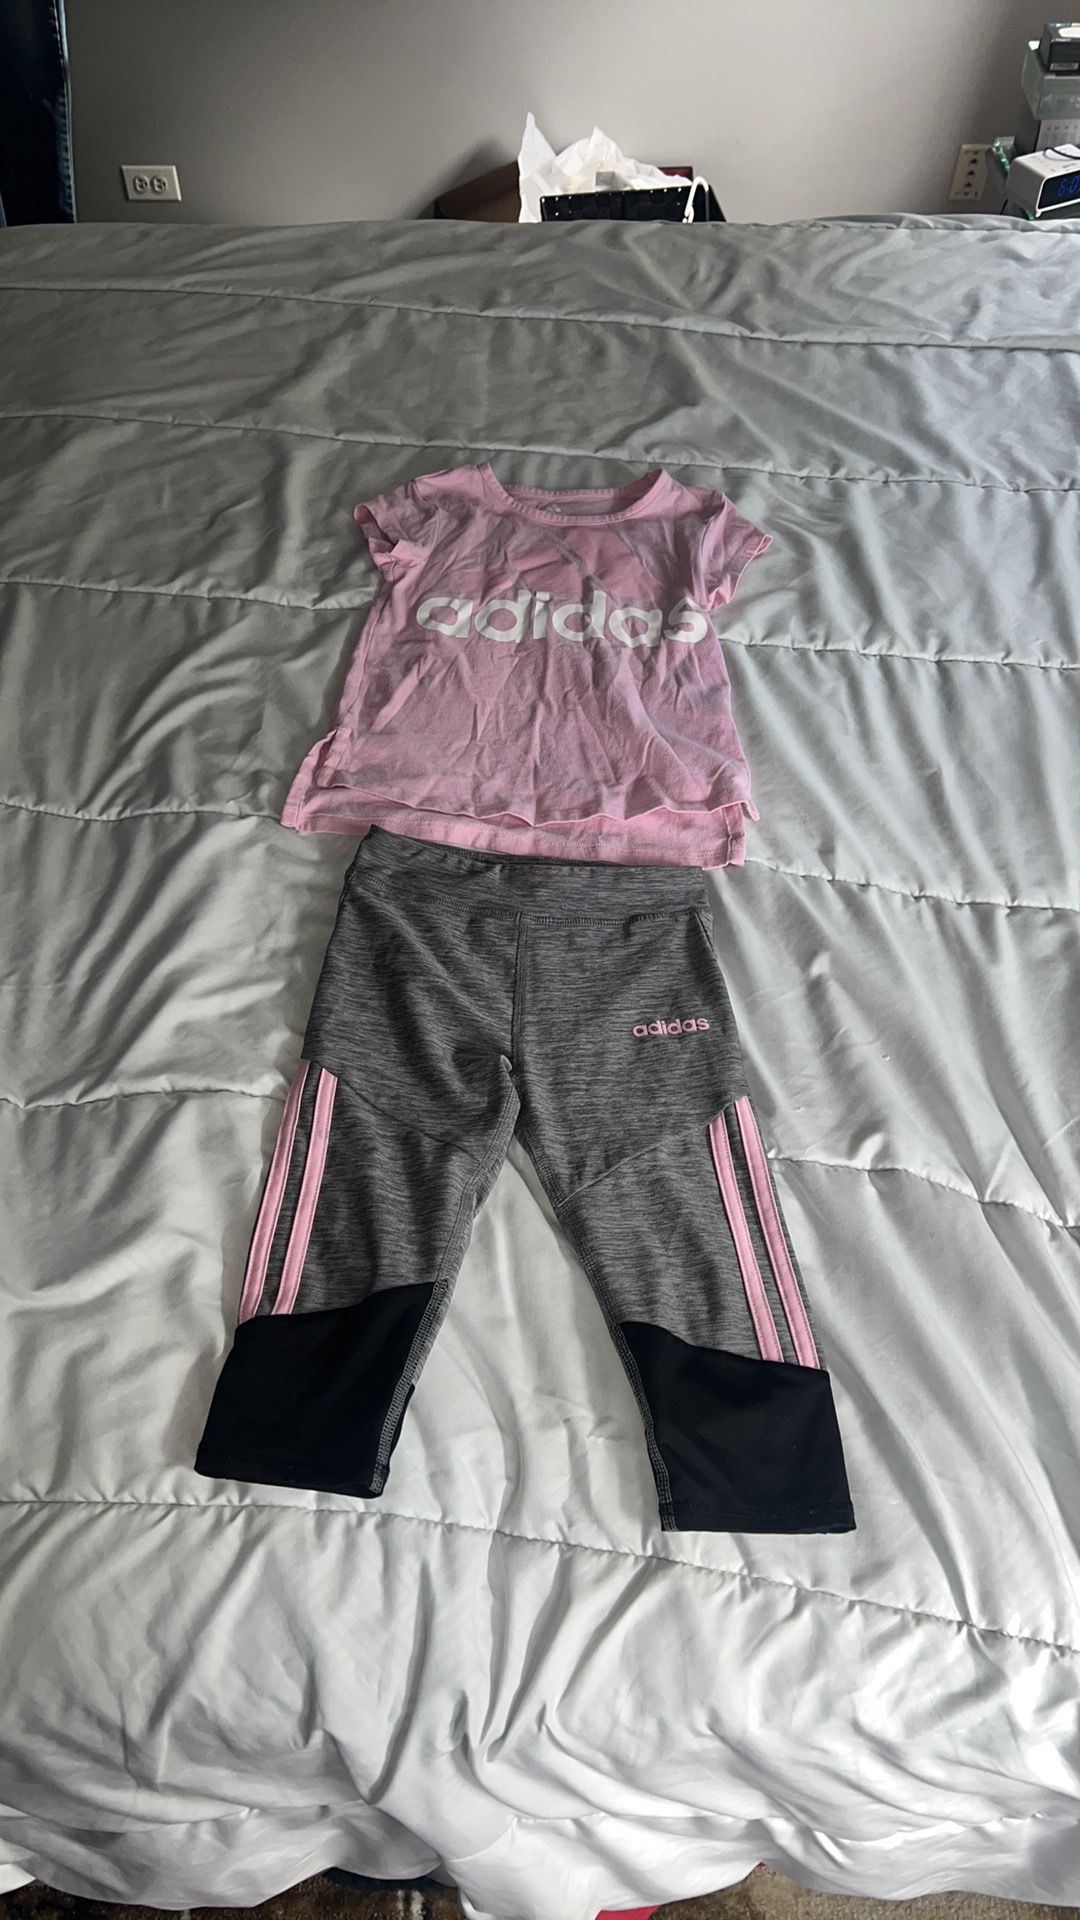 Pink Adidas shirt & Cropped Leggings Sz 5. Light stains on short & 1 on pants see pics. Shirt has minor piling 